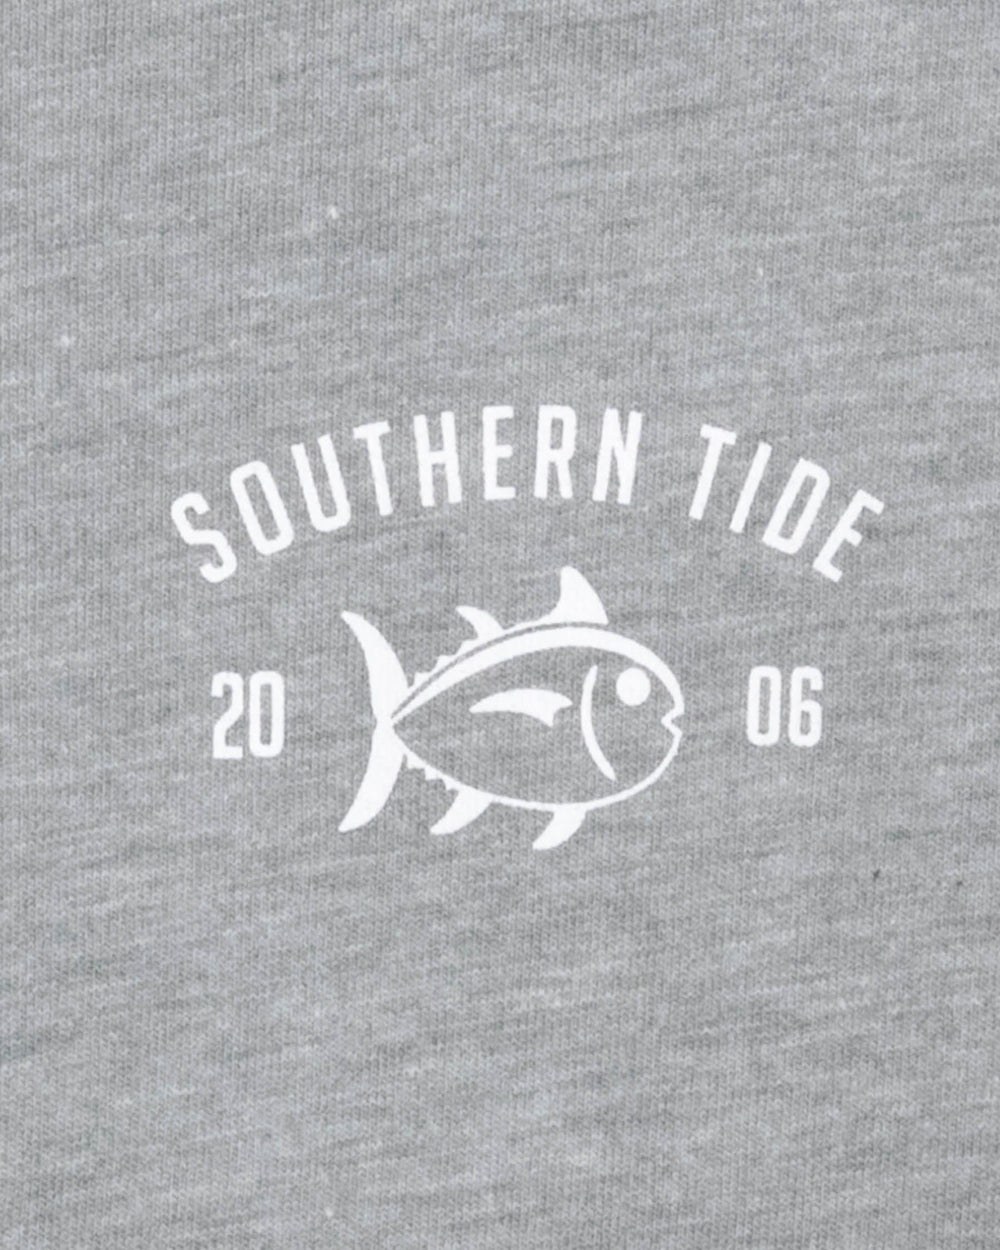 The detail view of the Southern Tide Kids RRR SJ Heather T-shirt by Southern Tide - Heather Quarry